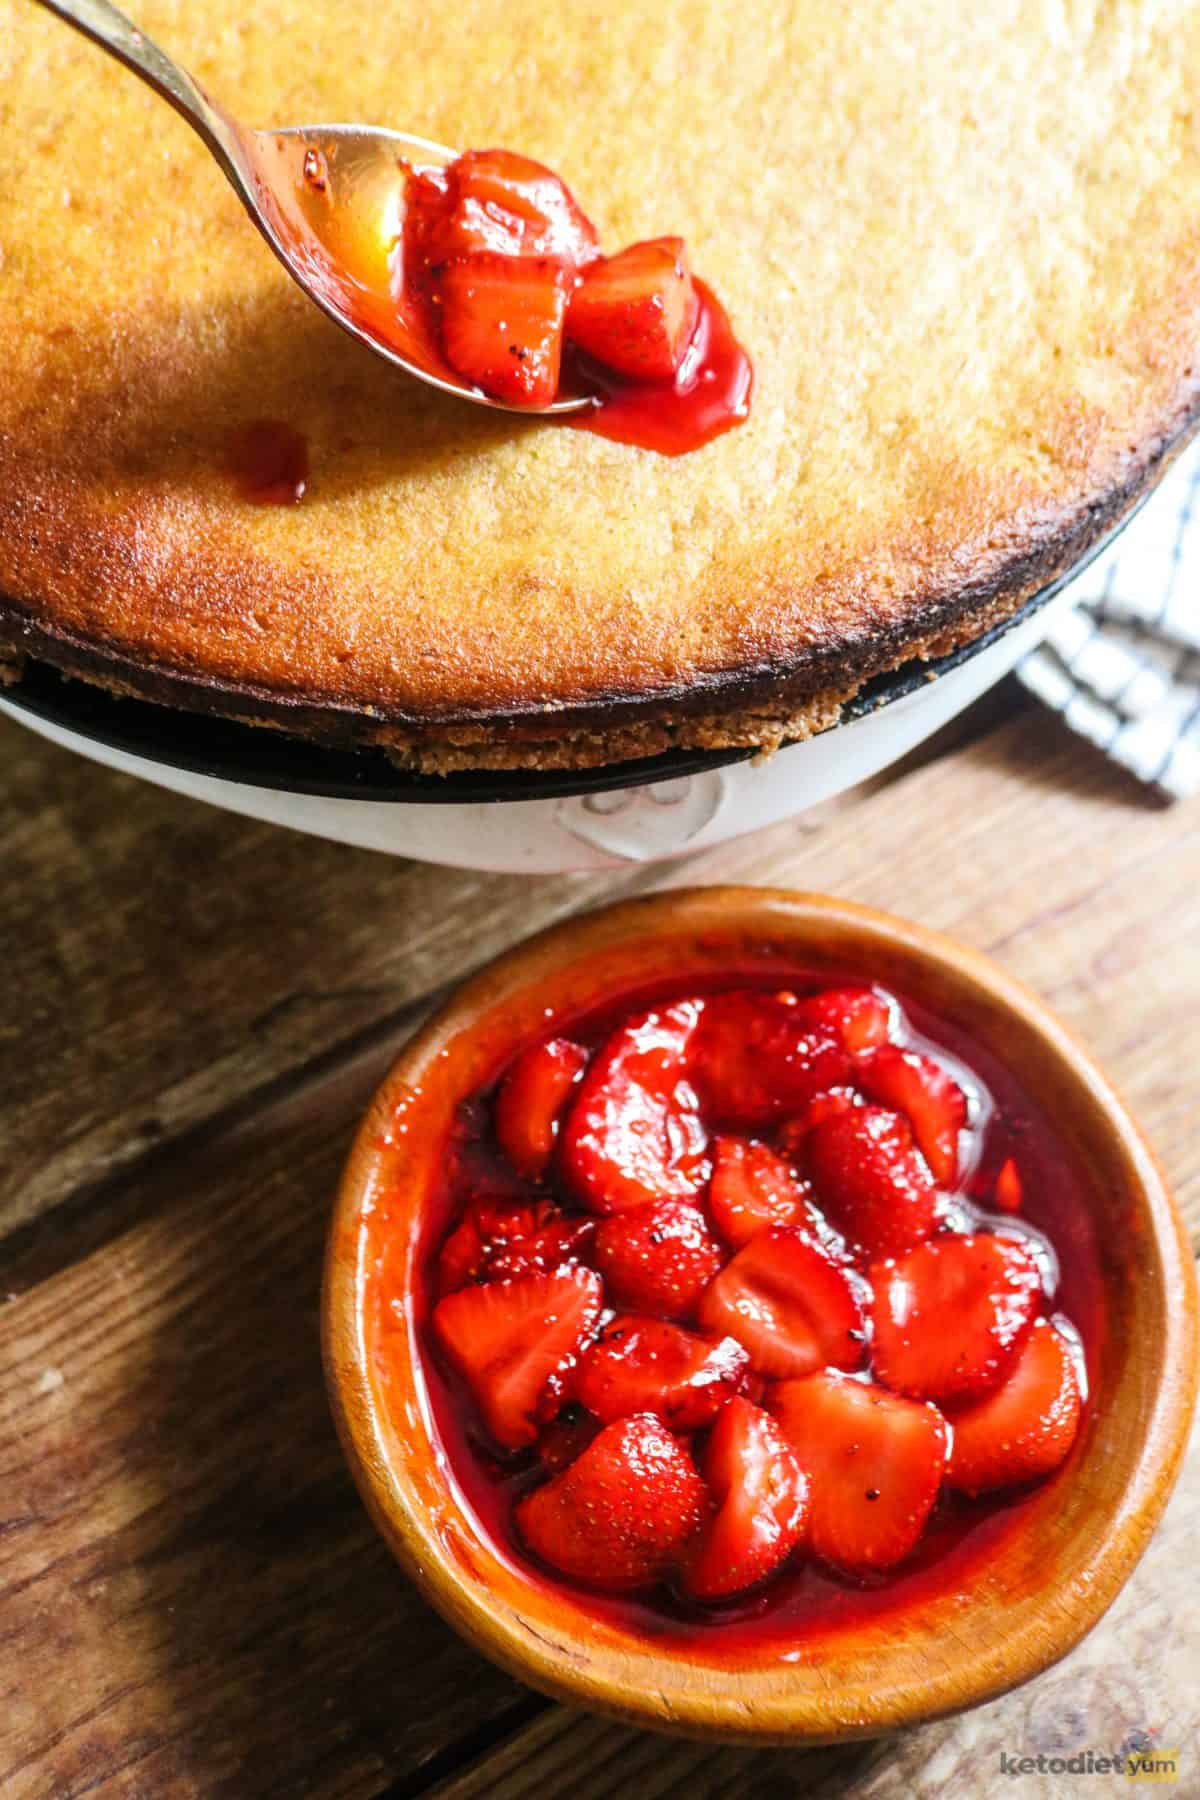 Spooning a strawberry sauce over the top of a keto cream cheese tart